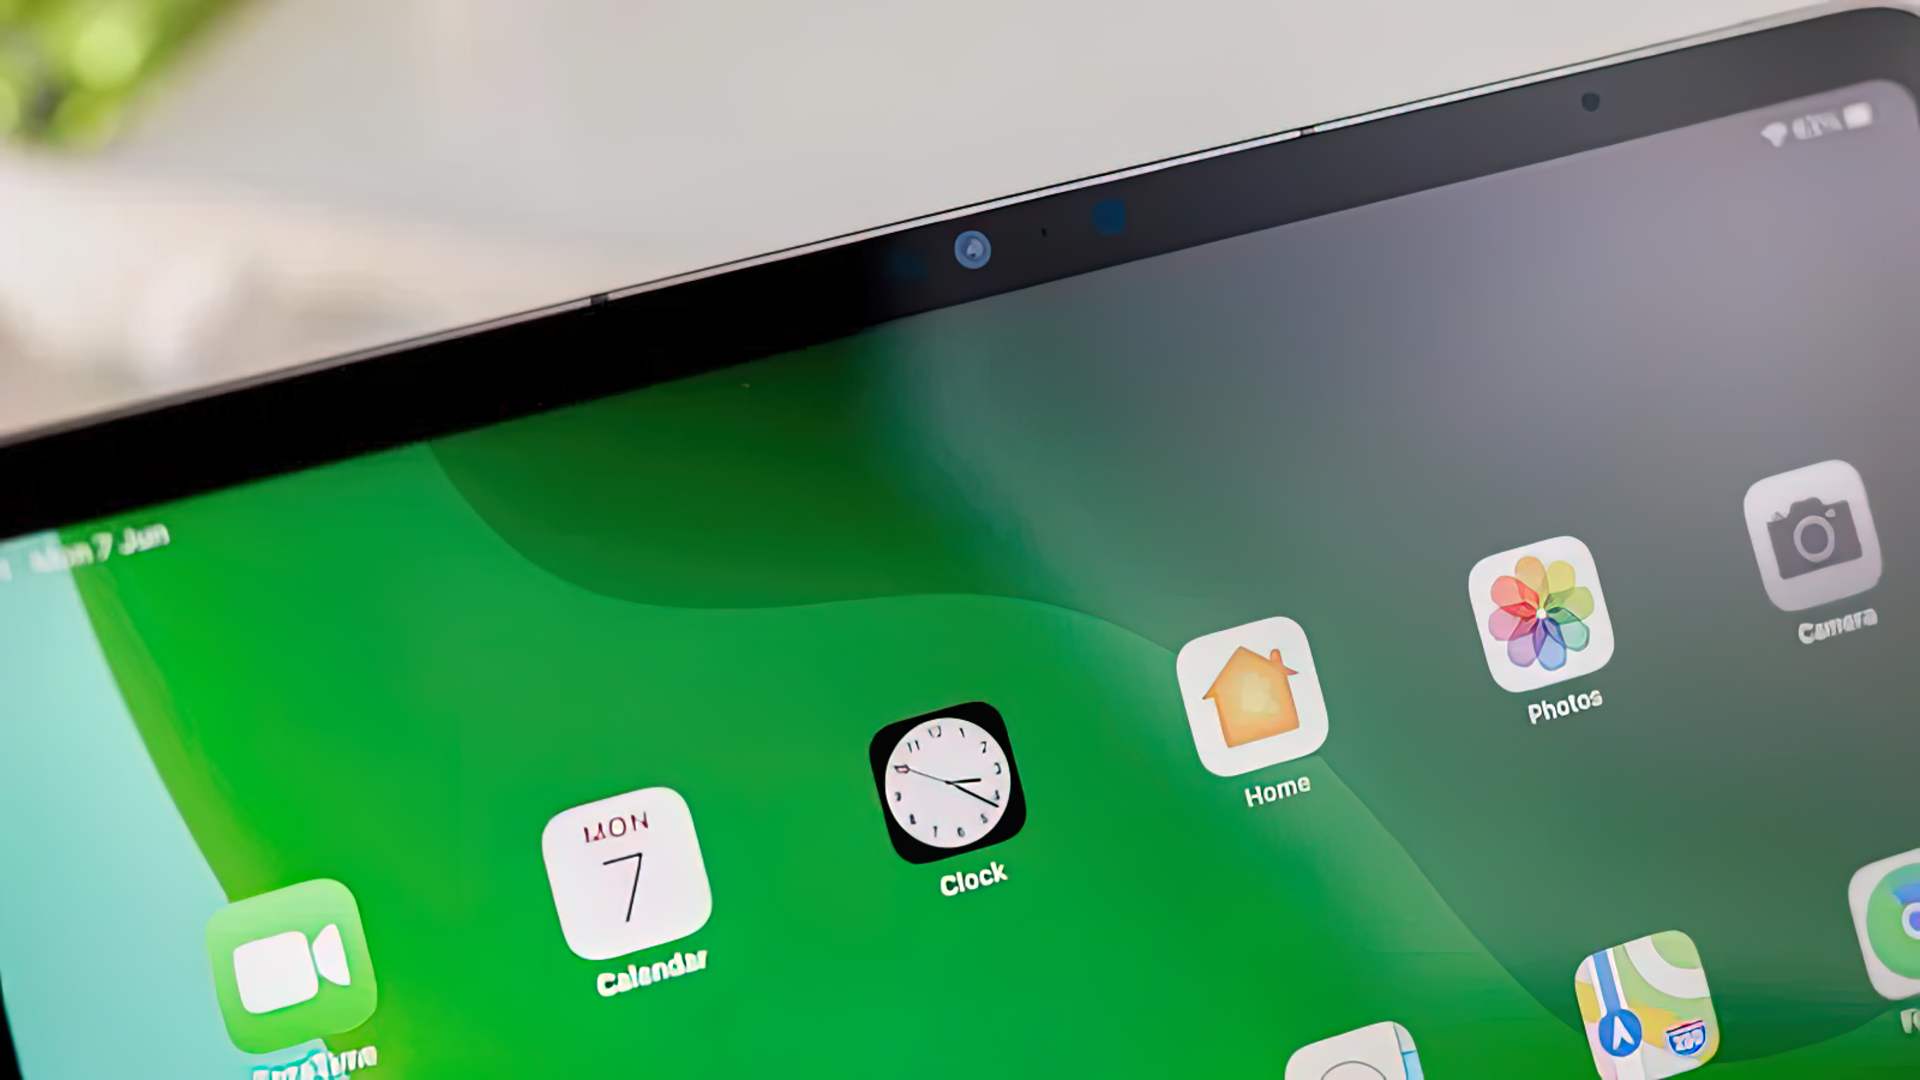 iPadOS 16 supported devices